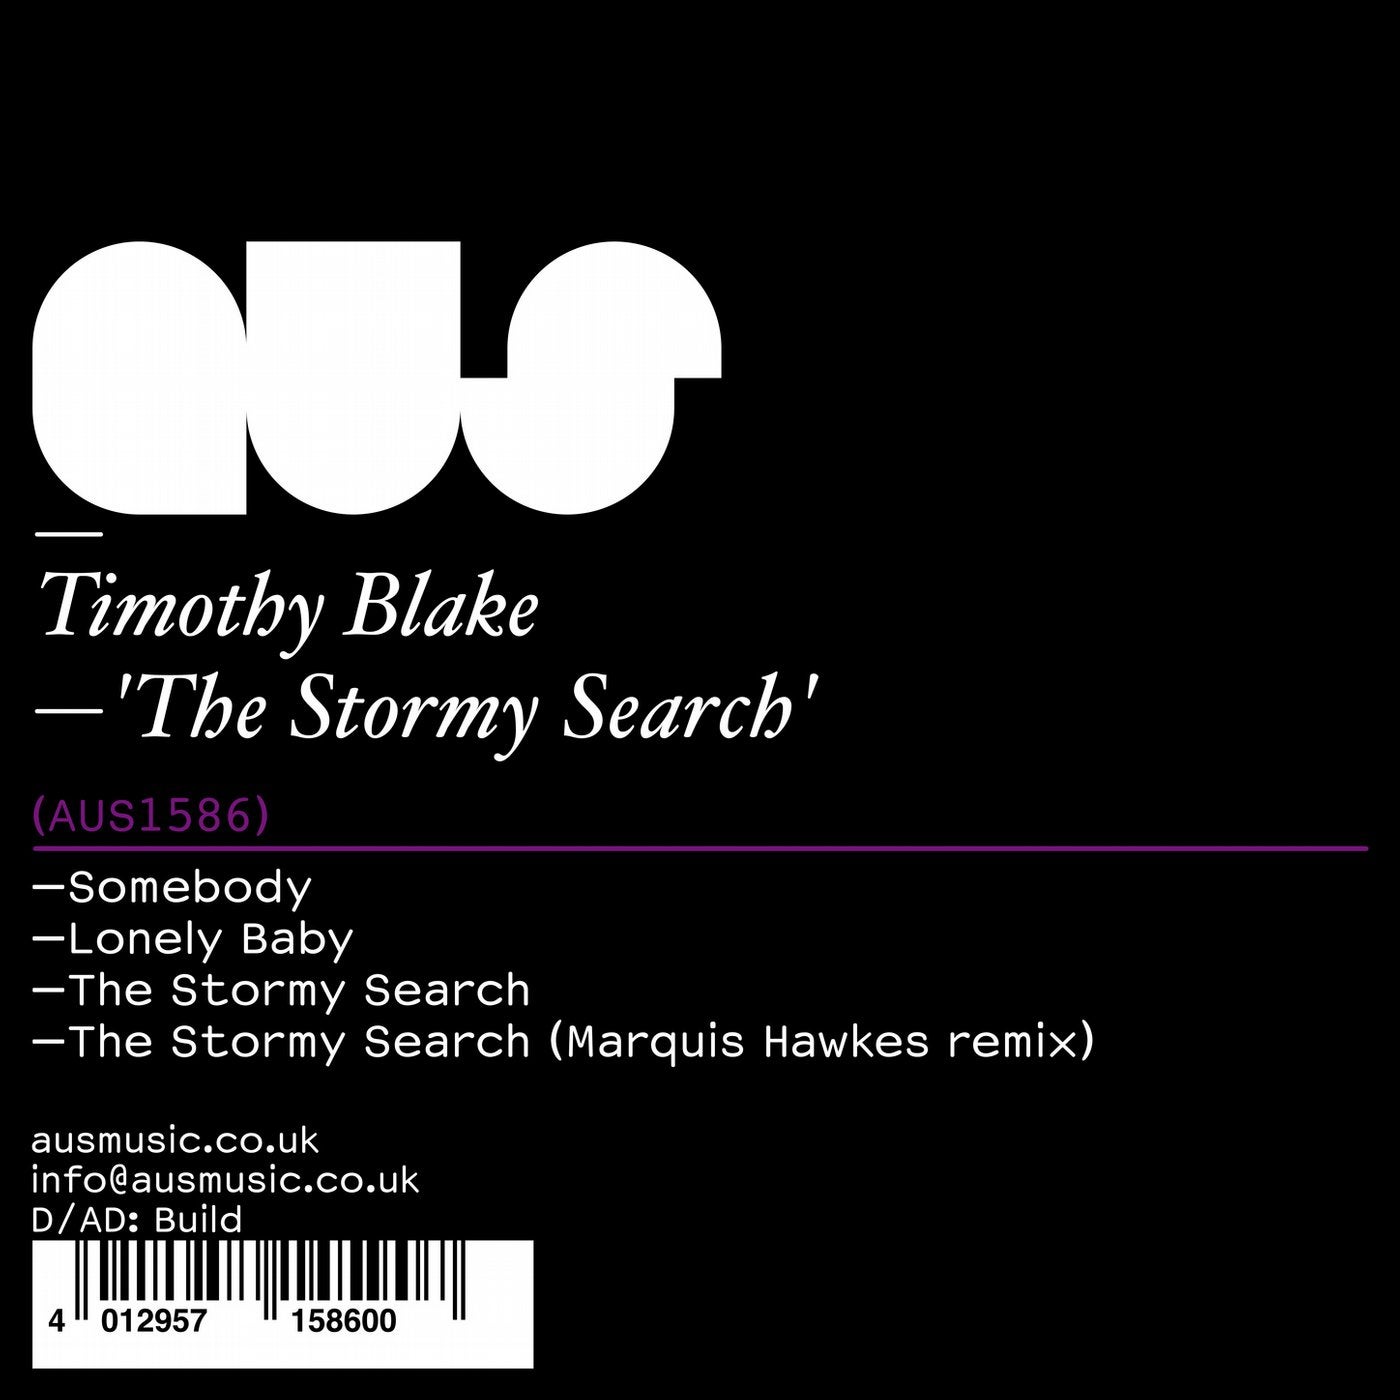 The Stormy Search